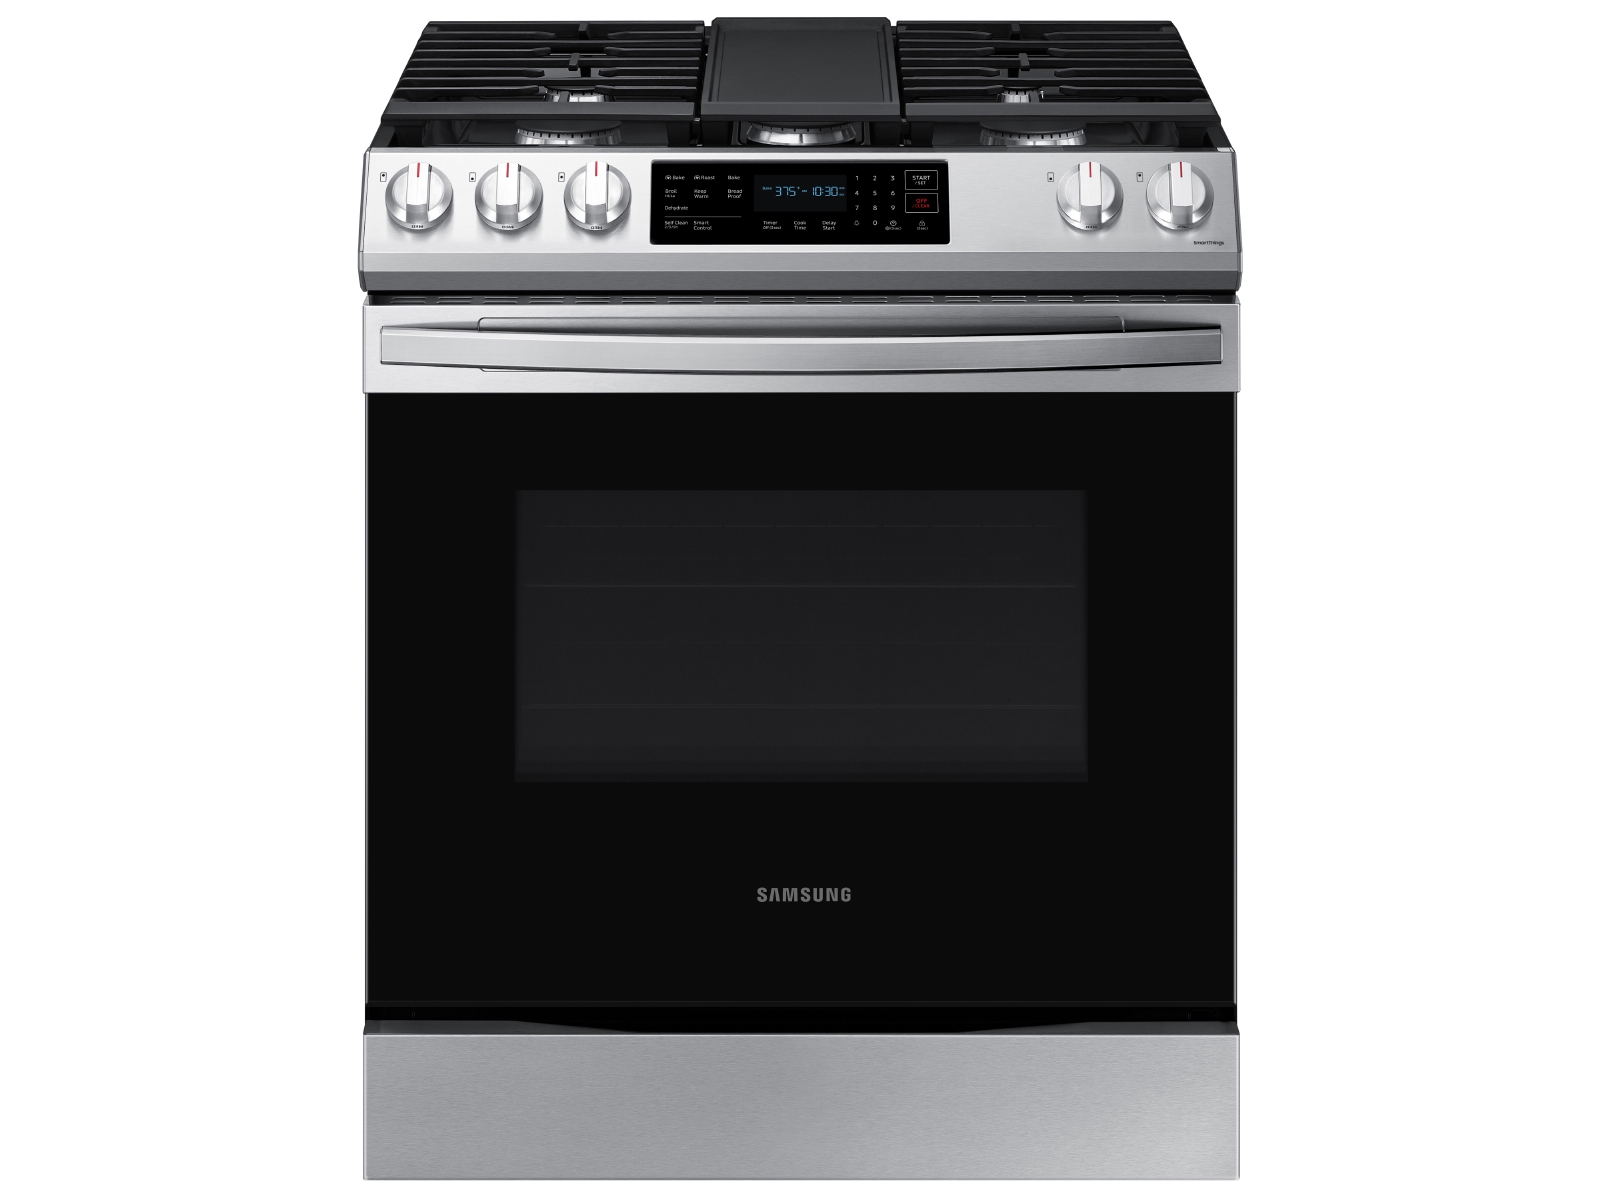 Photos - Cooker Samsung 6.0 cu. ft. Smart Slide-in Gas Range with Convection in Silver(NX6 